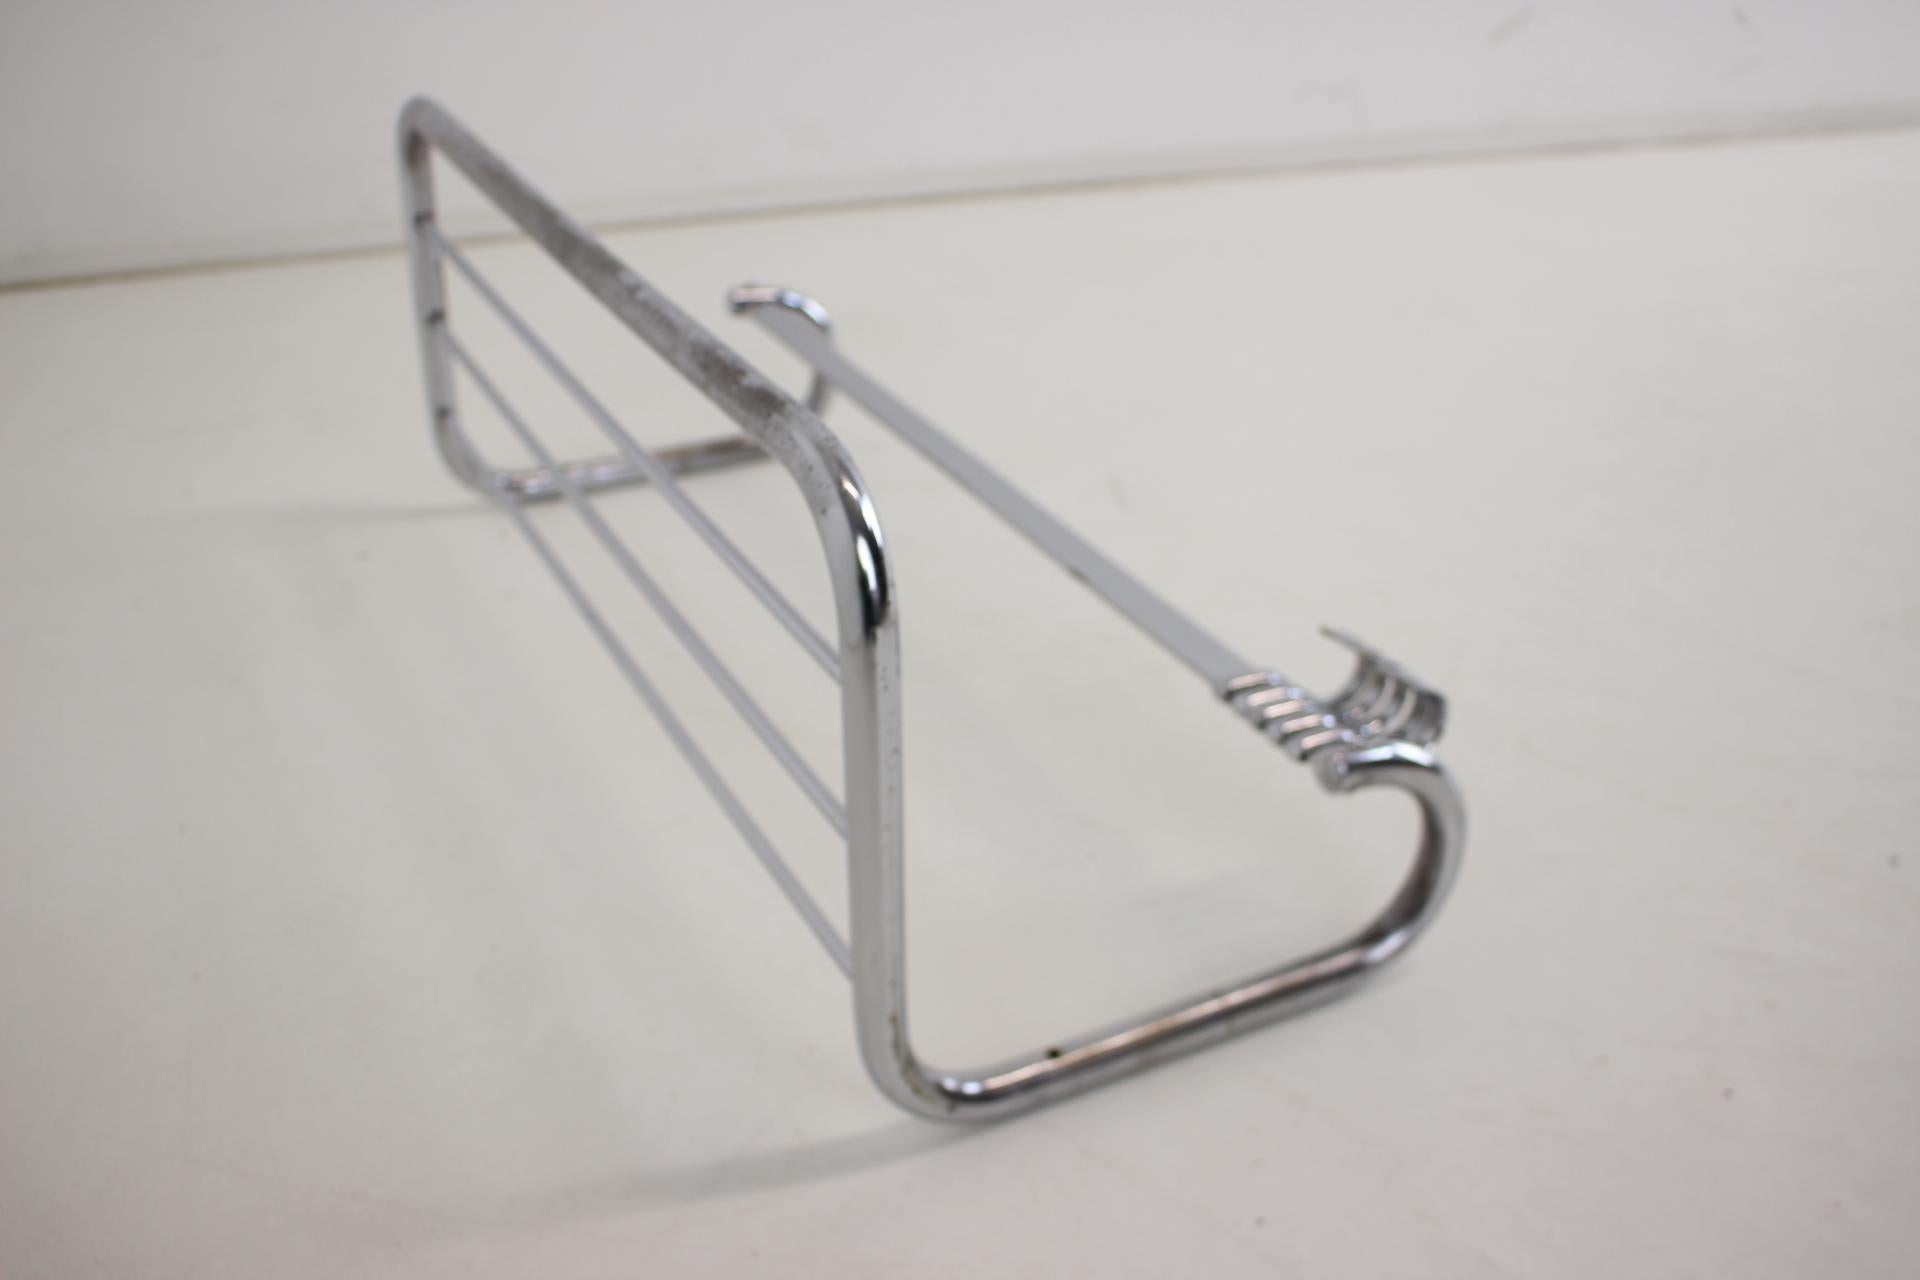 1930's Bauhaus Chrome Wall Coat Hanger In Good Condition For Sale In Praha, CZ